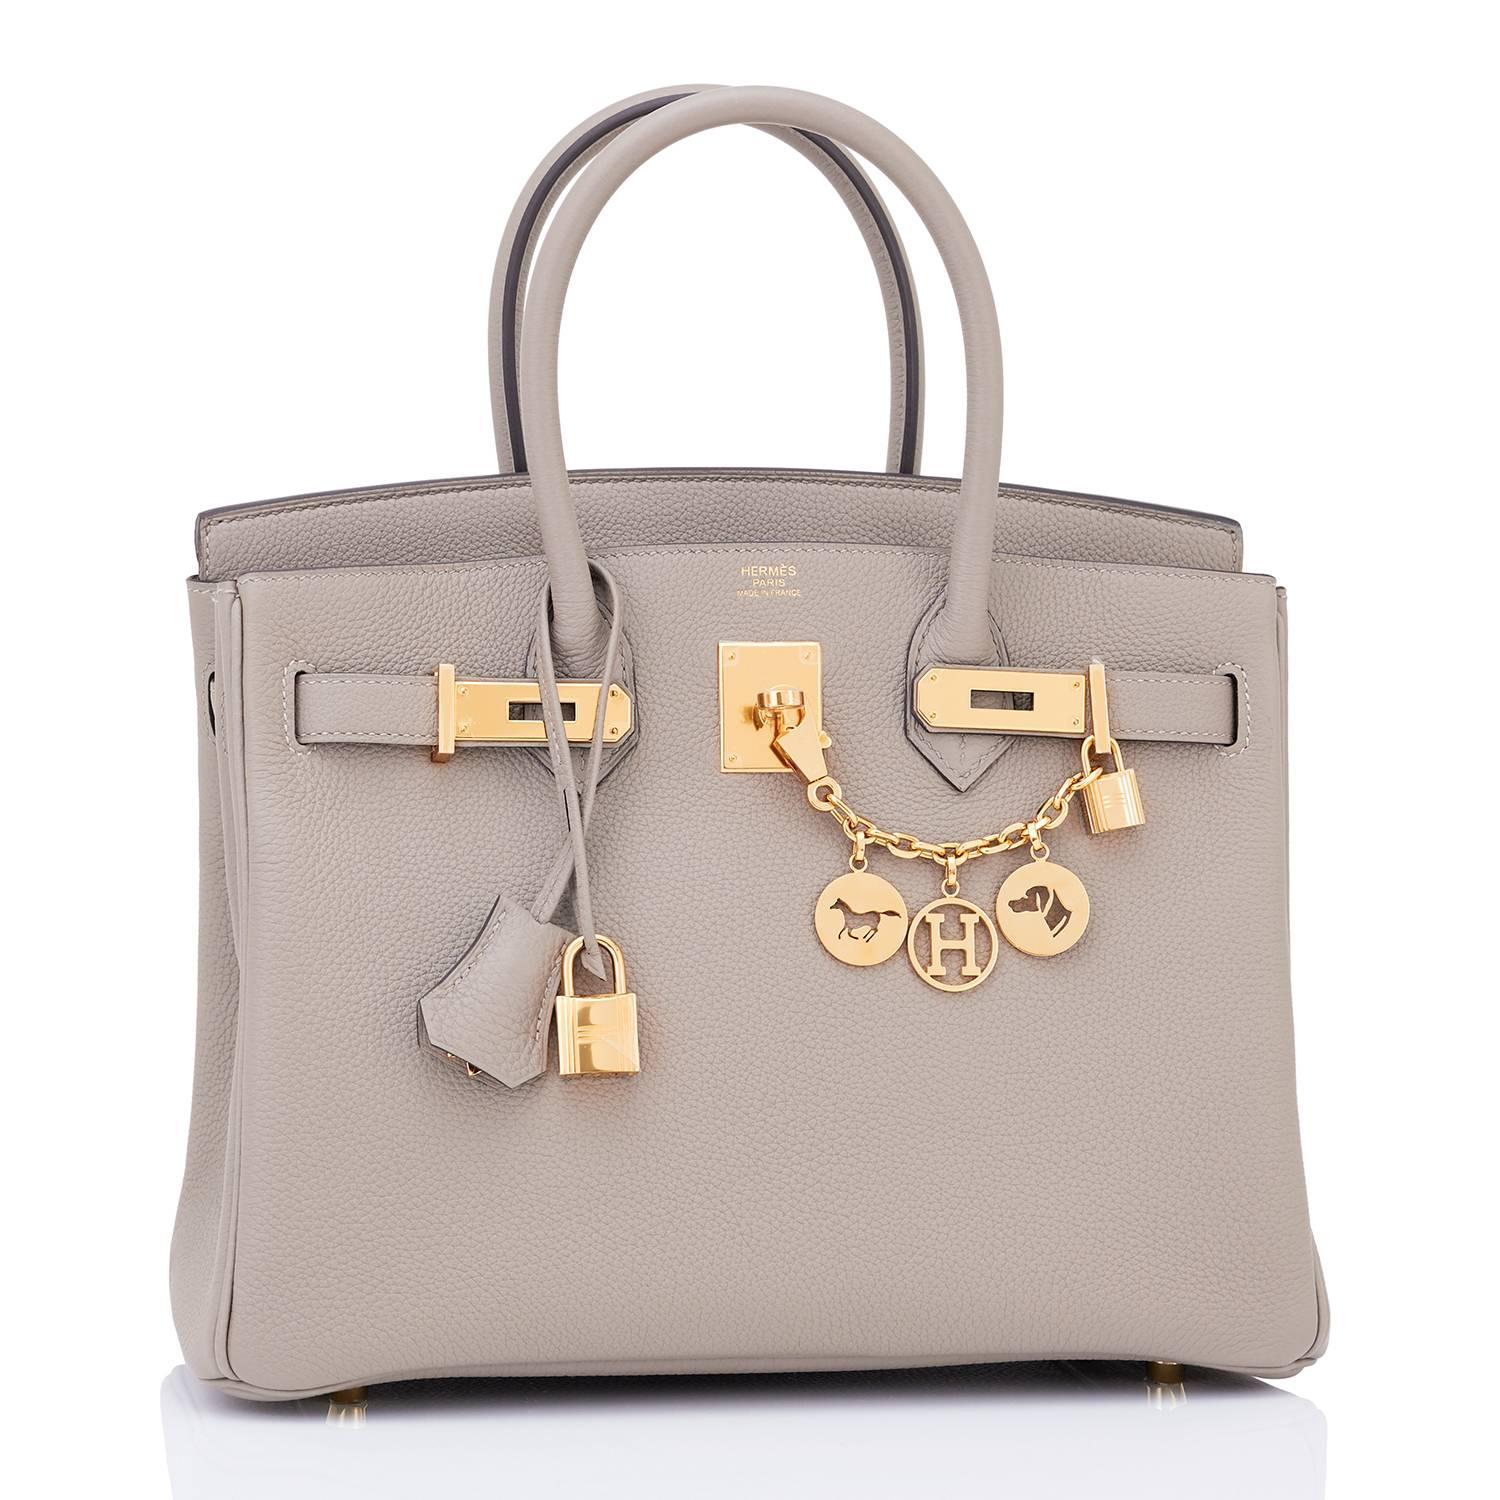 Devastatingly gorgeous!  Gris Asphalte is the best neutral to come from Hermes in many years.
New or Never Worn. Pristine Condition (with plastic on hardware). 
Perfect gift! Comes in full set with lock, keys, clochette, sleeper, raincoat, and